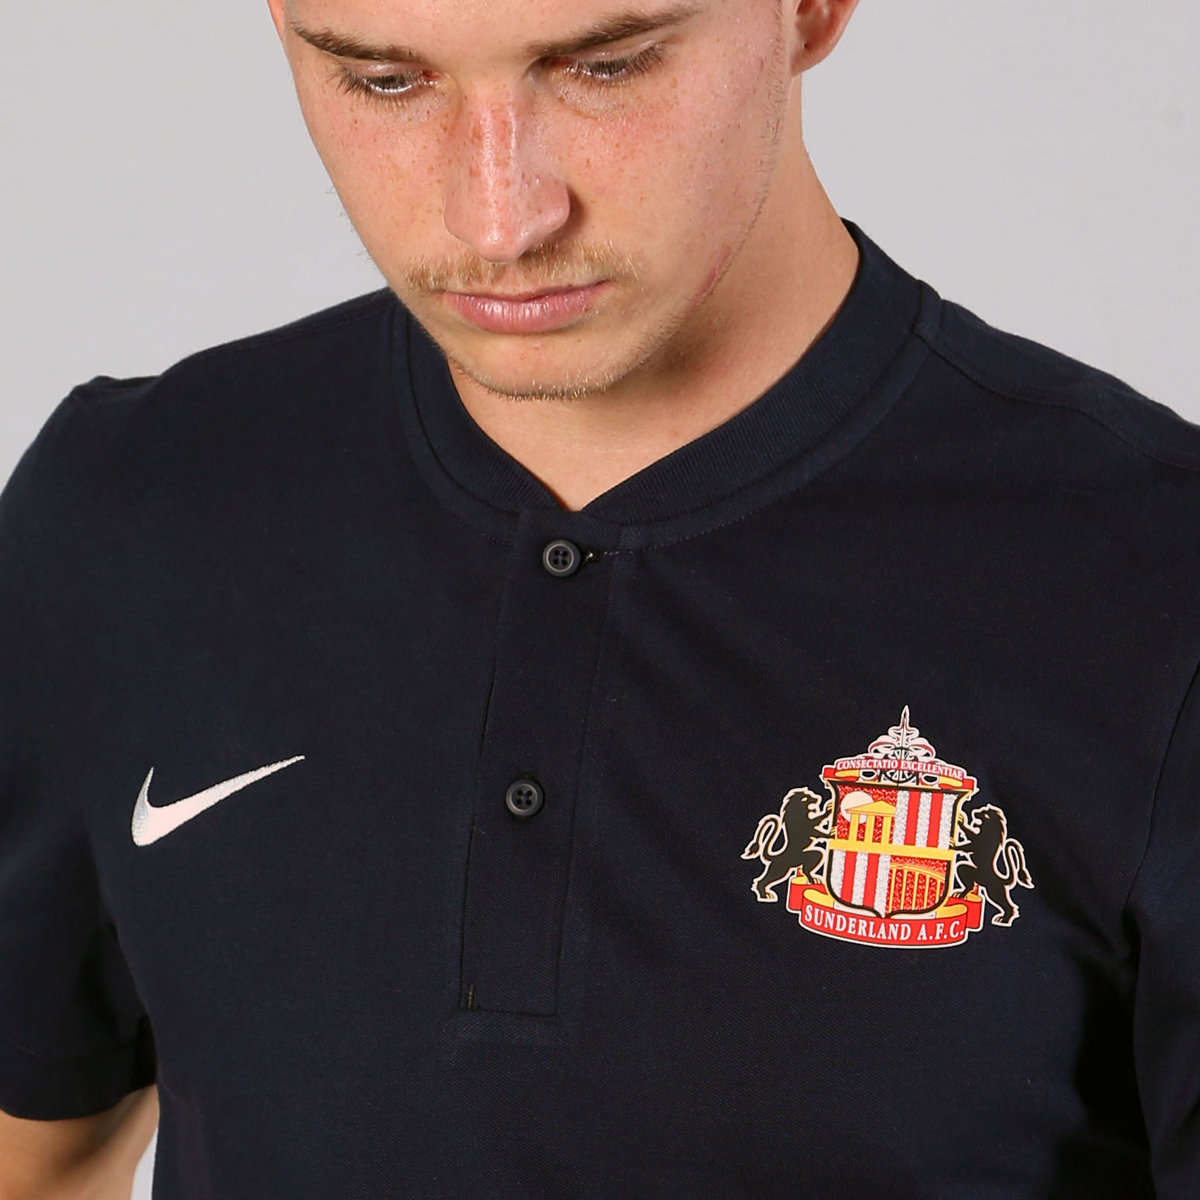 Buy the 21-22 Nike Travel Polo online at Sunderland AFC Store